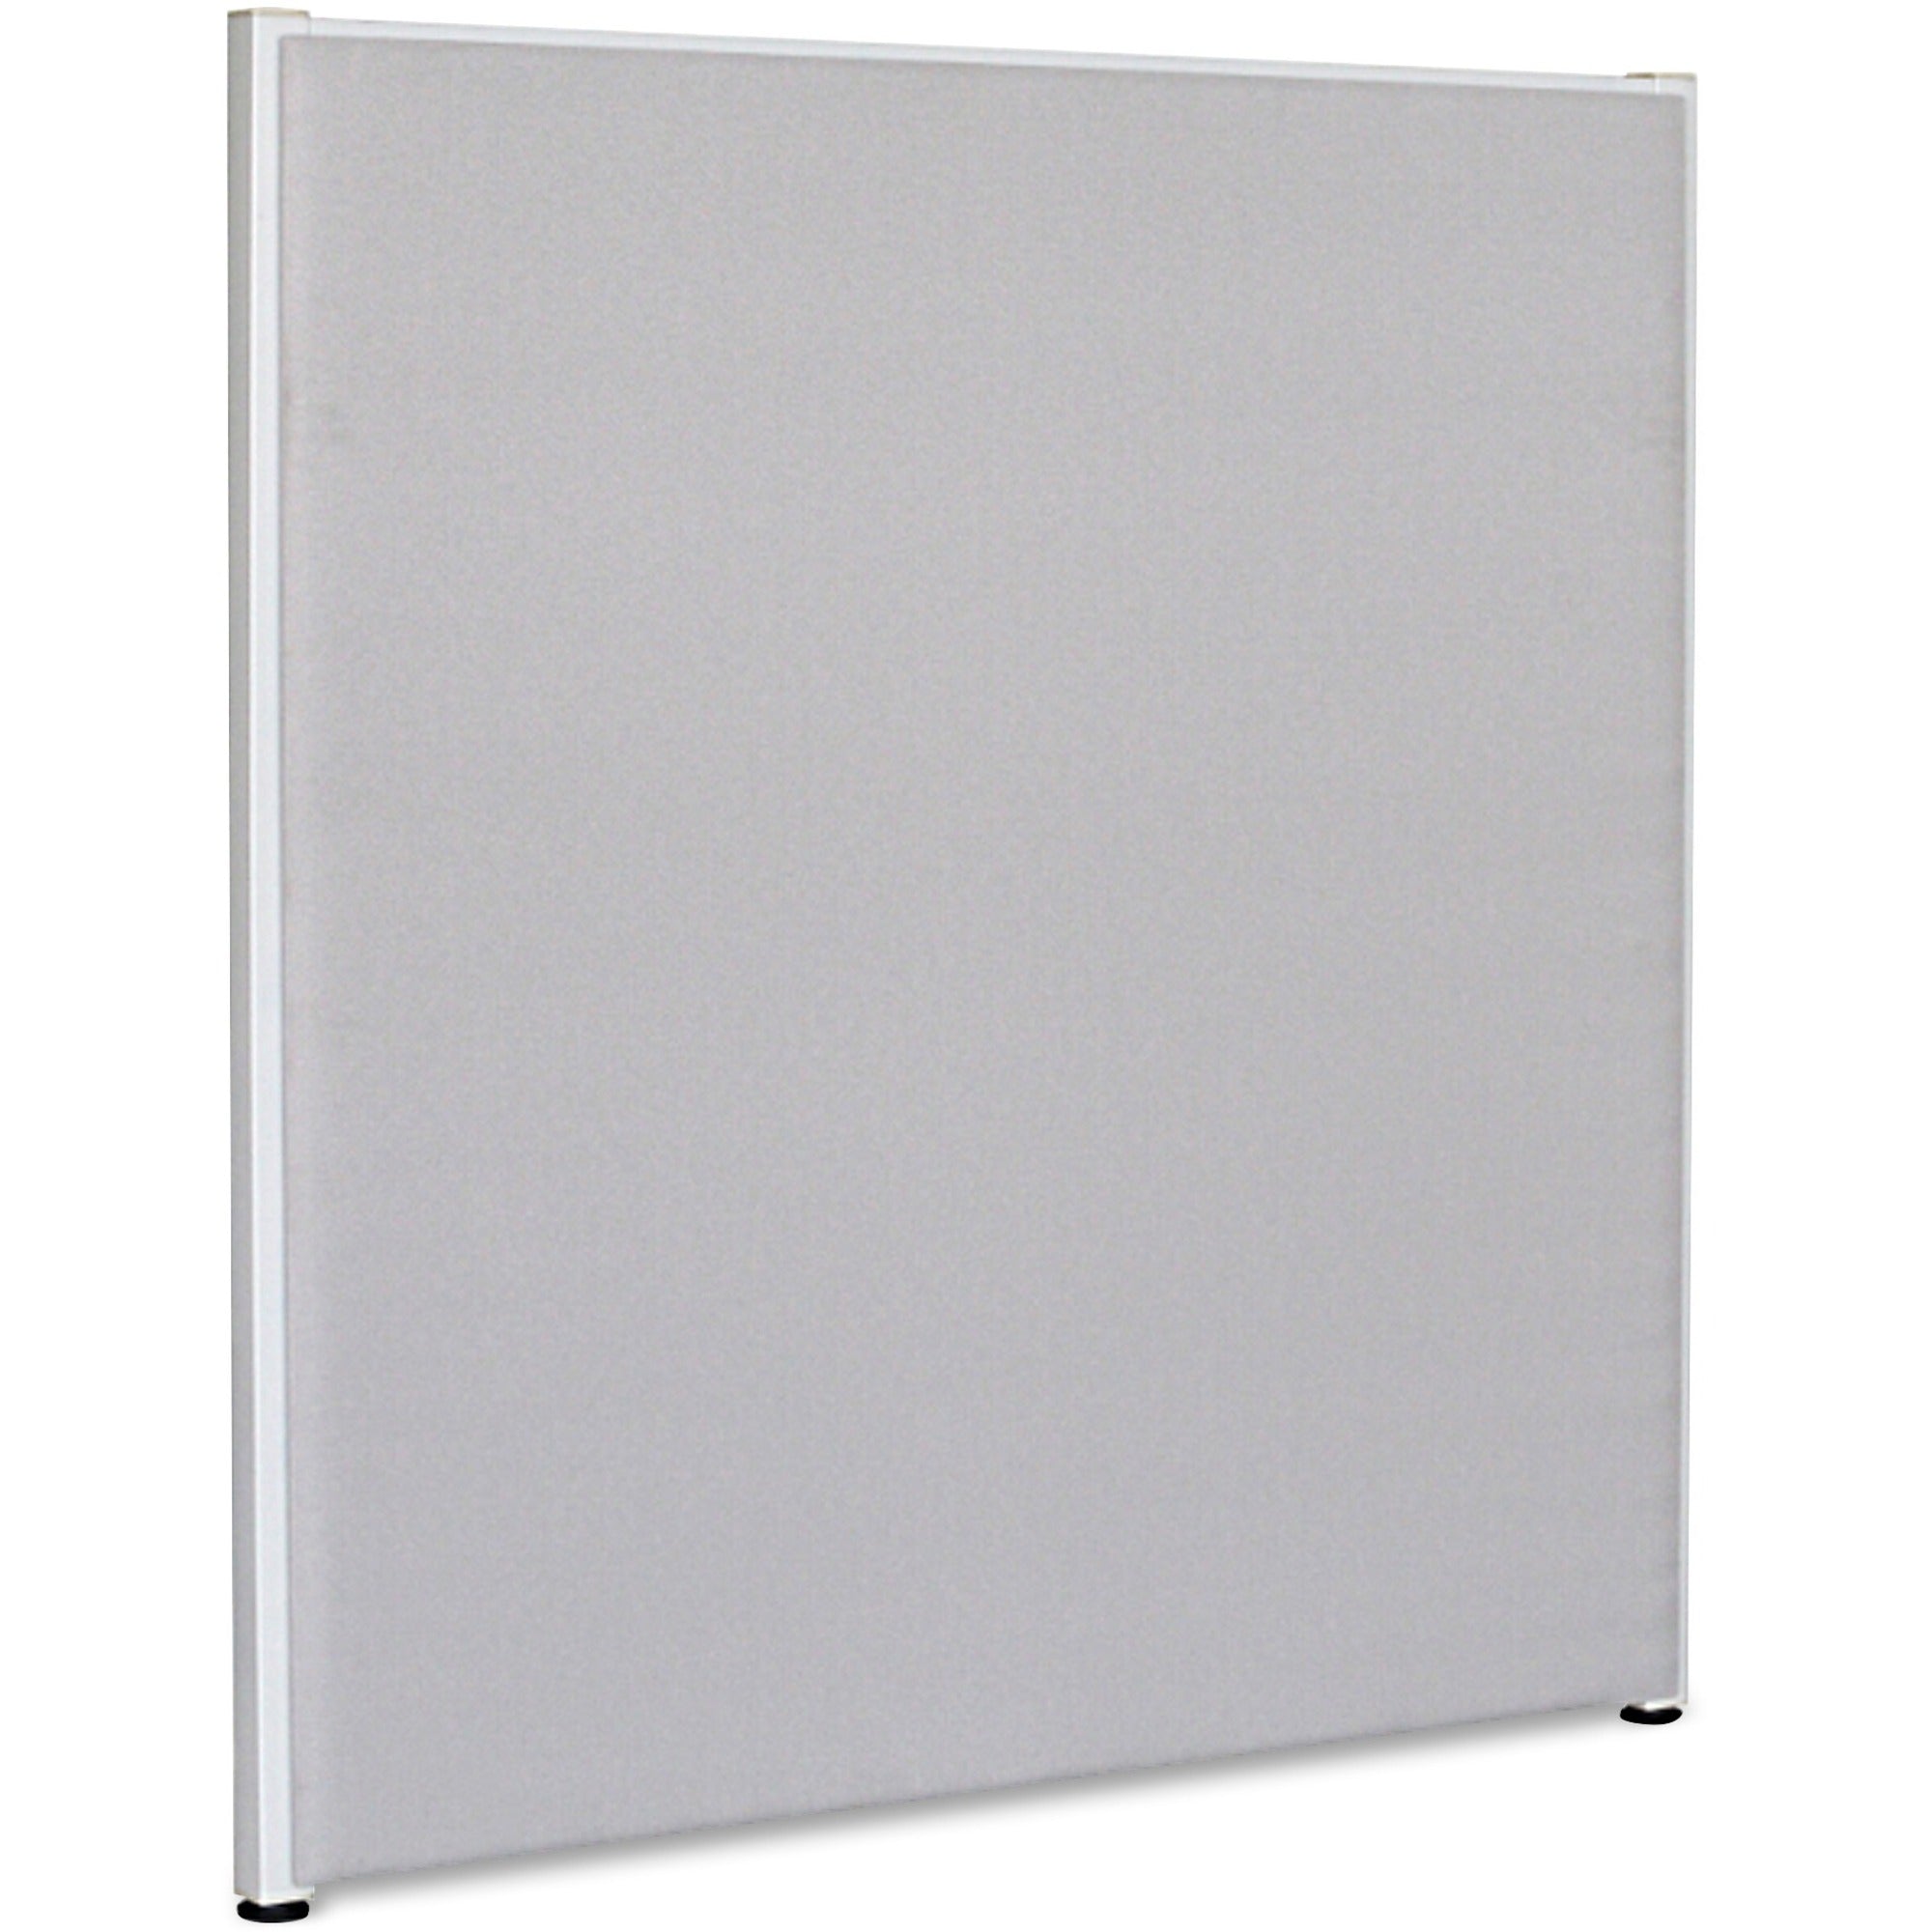 Lorell Panel System Partition Fabric Panel - 48.8" Width x 60" Height - Steel Frame - Gray - 1 Each - 